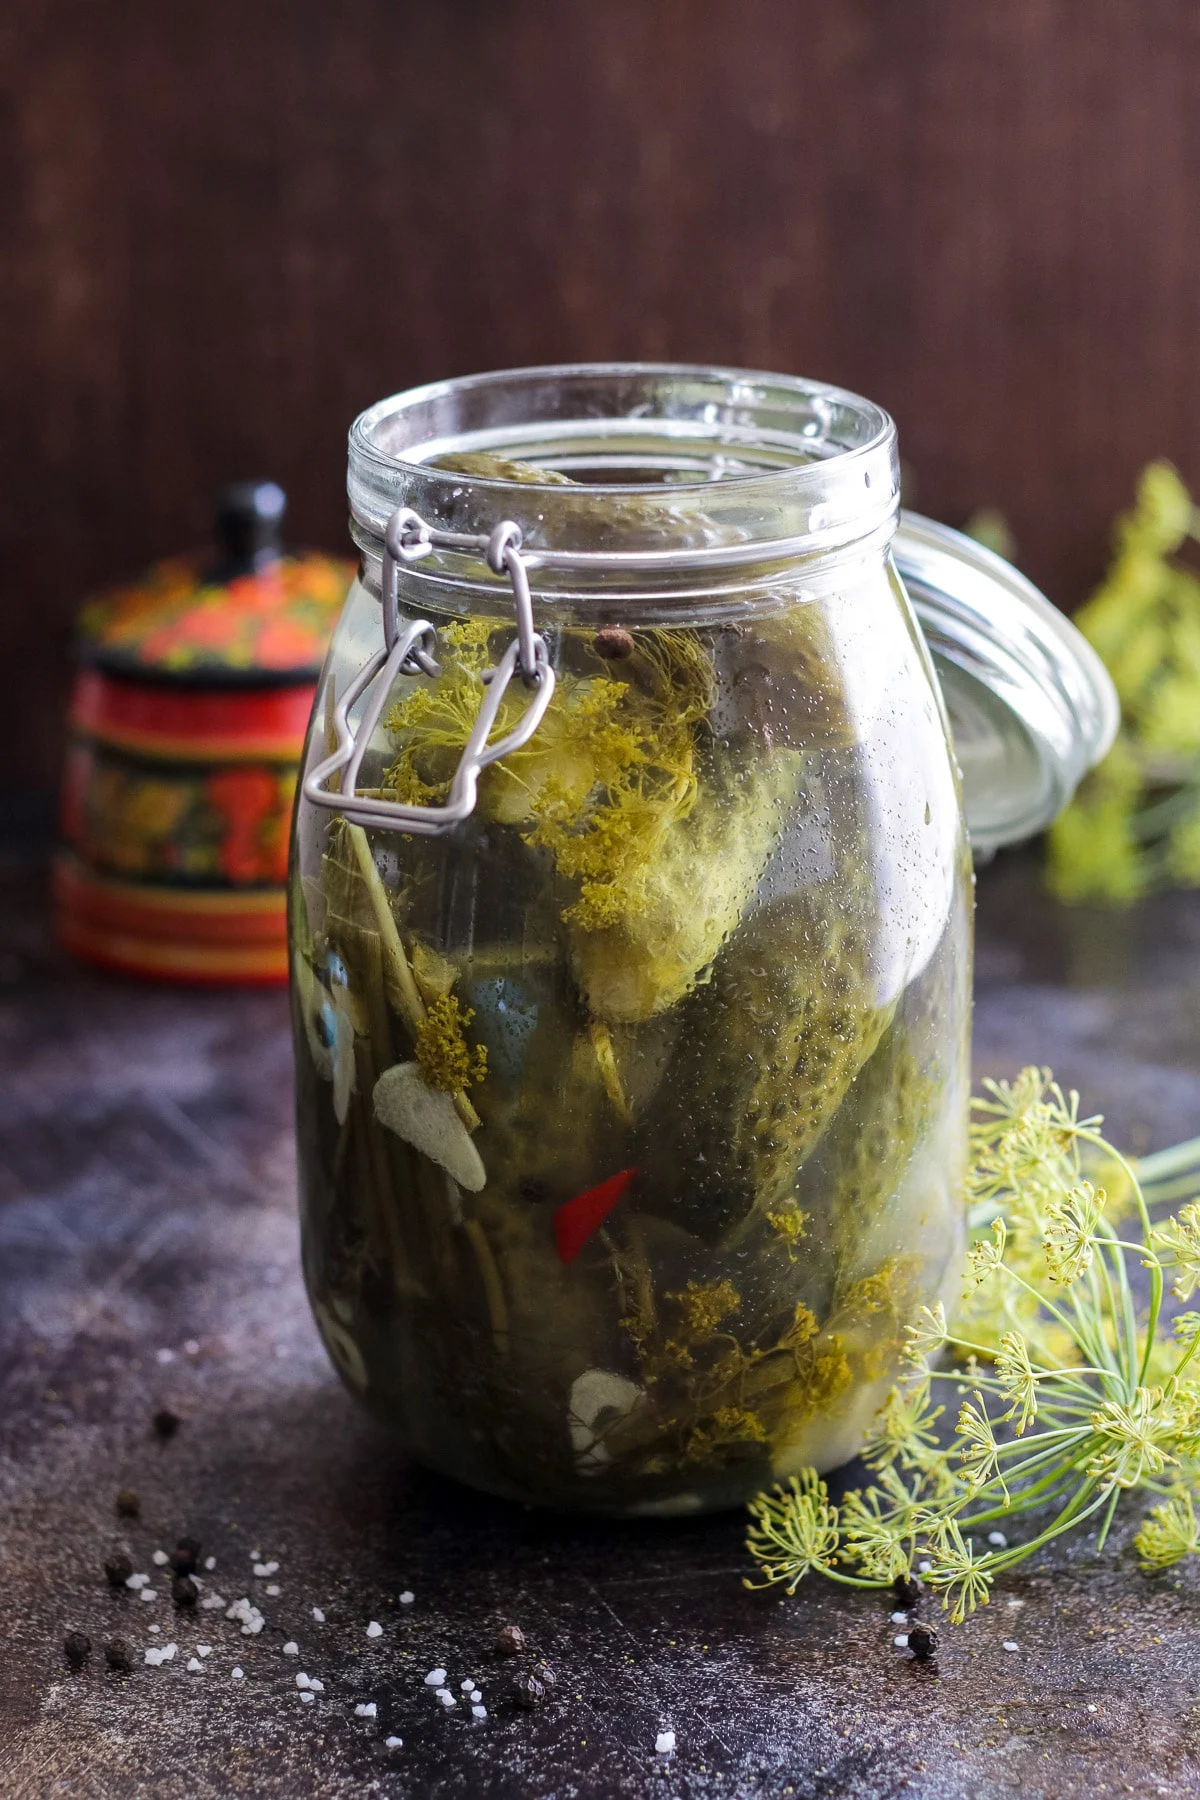 An opened jar with Russian pickles